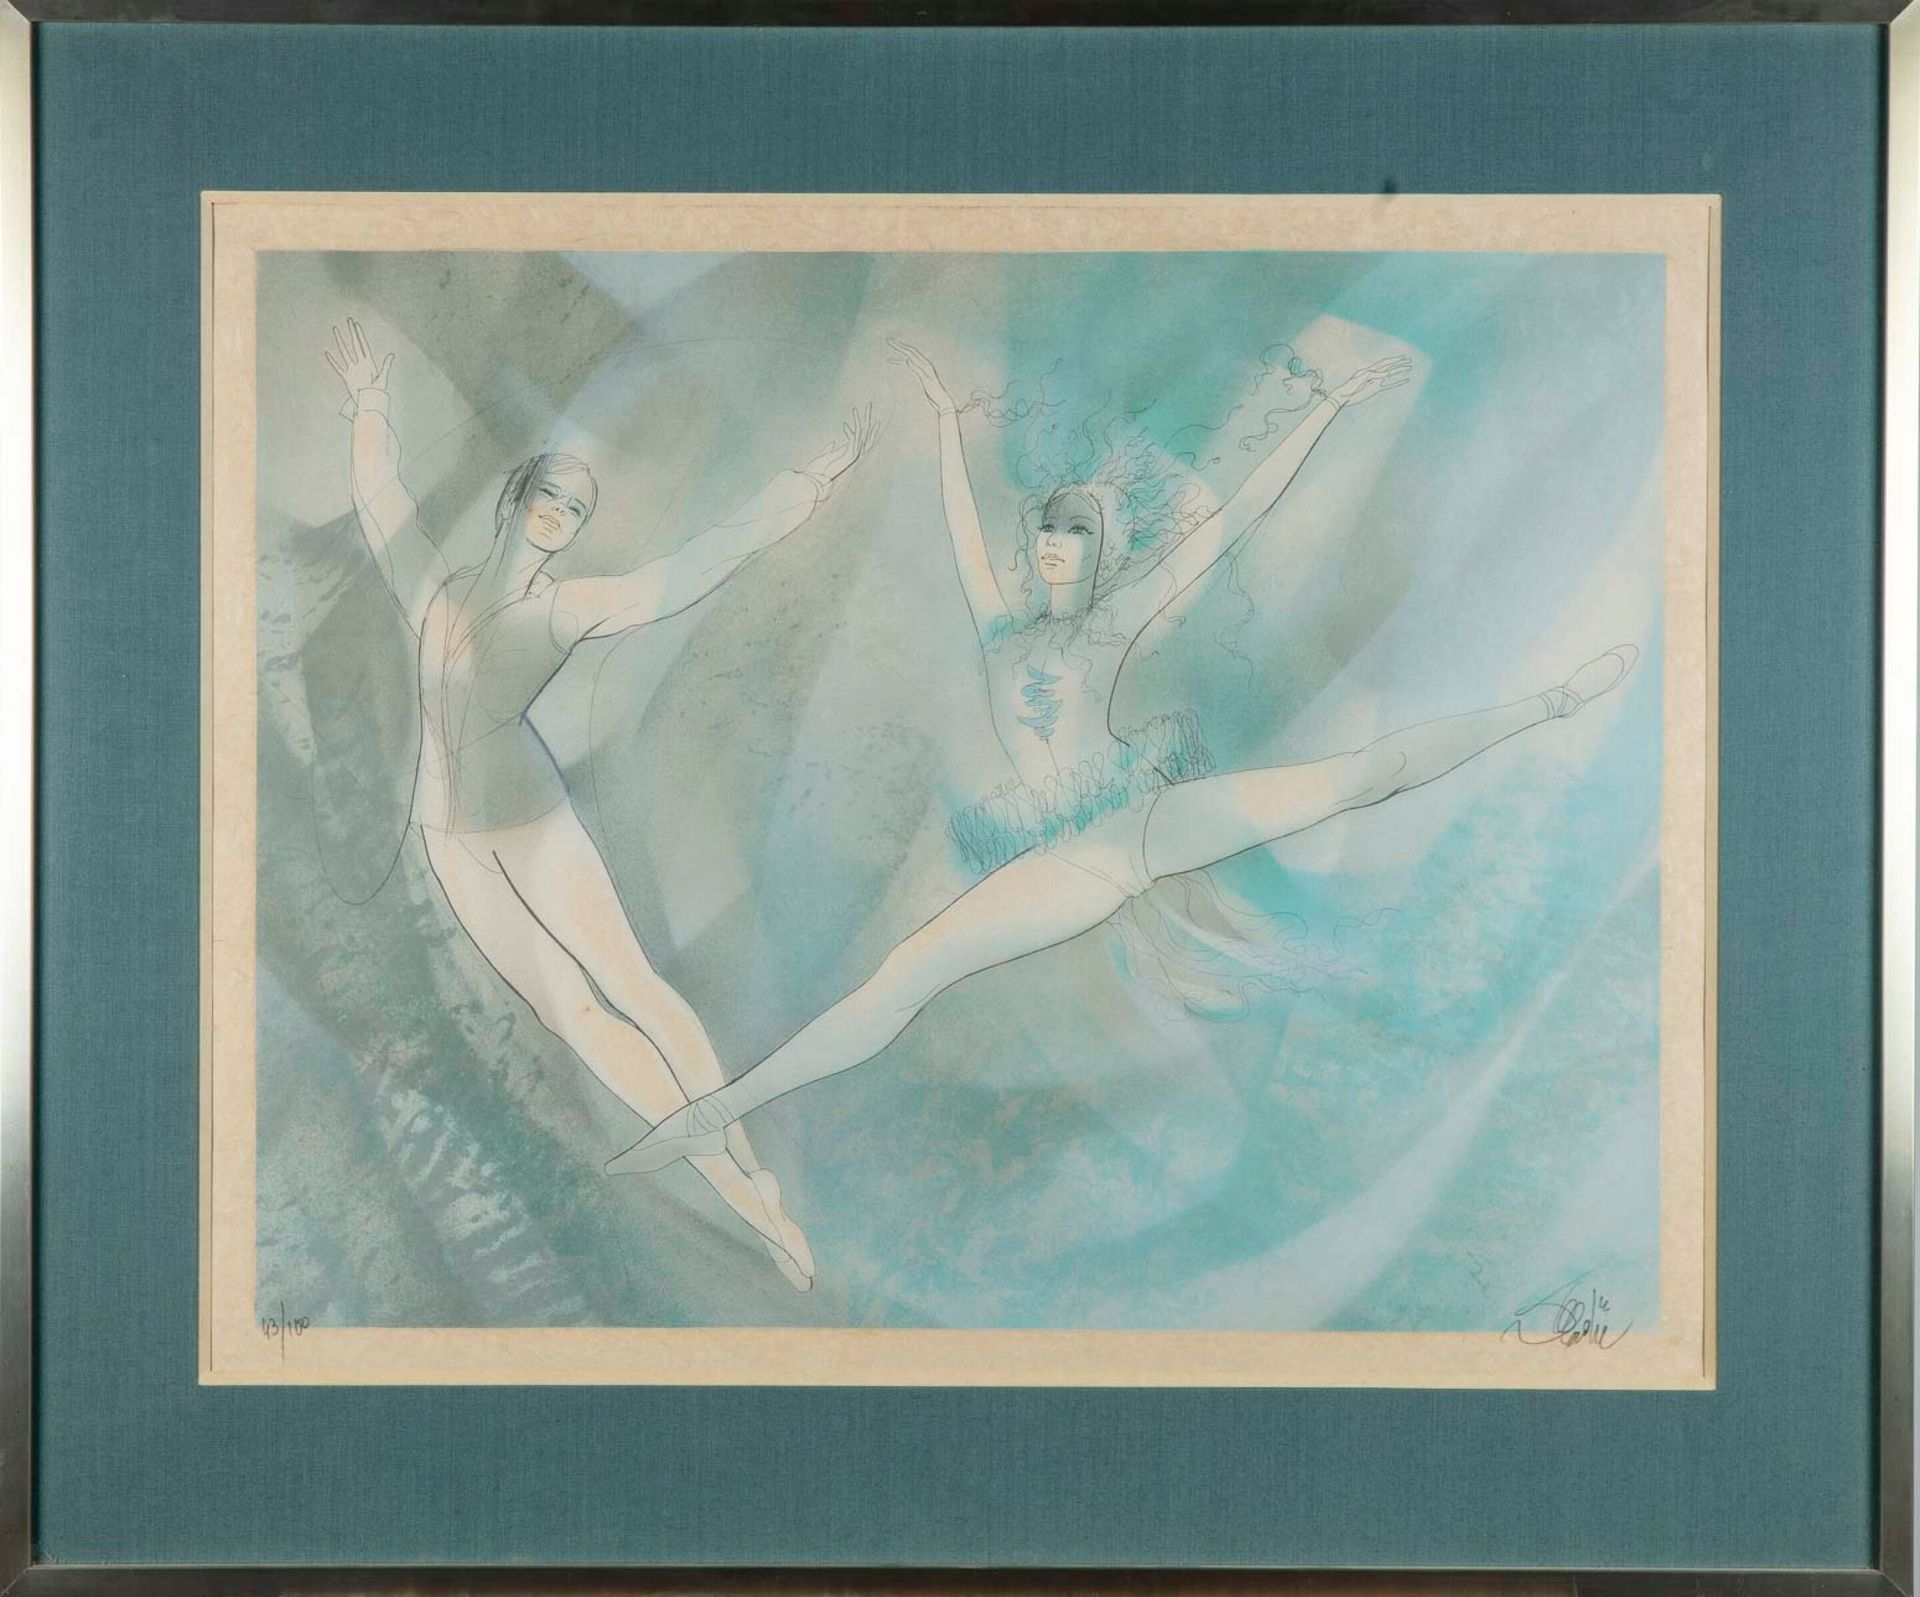 Null Jean-Baptiste VALADIE (1933)

The Dancers 

Lithograph on Japan paper

Sign&hellip;